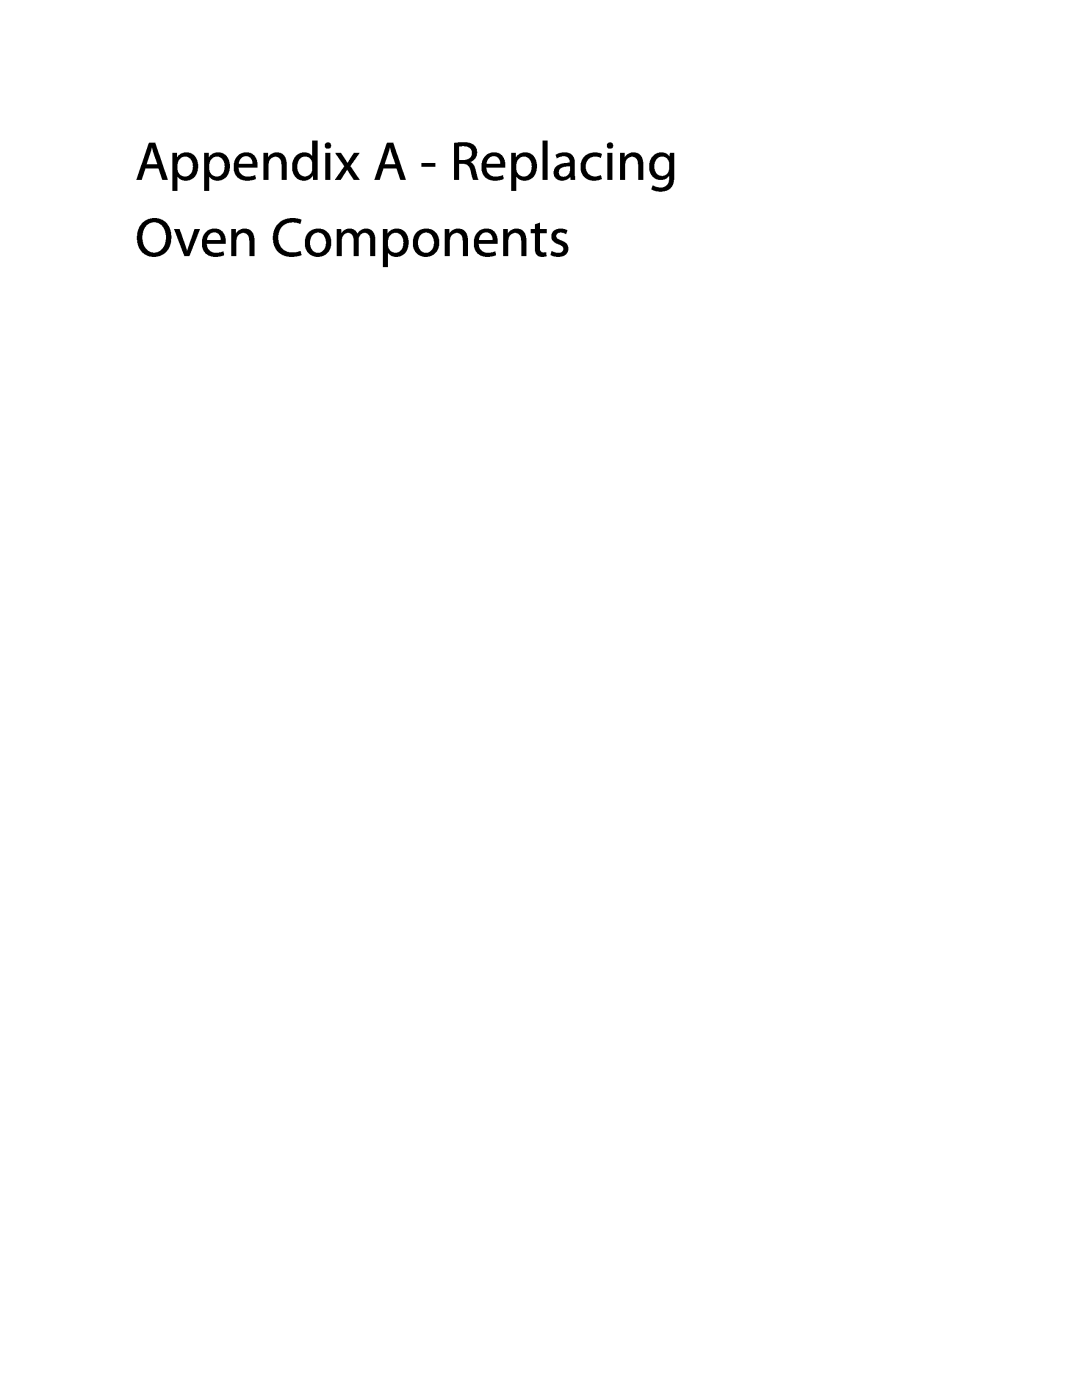 Turbo Chef Technologies 3240 manual Appendix A - Replacing Oven Components 